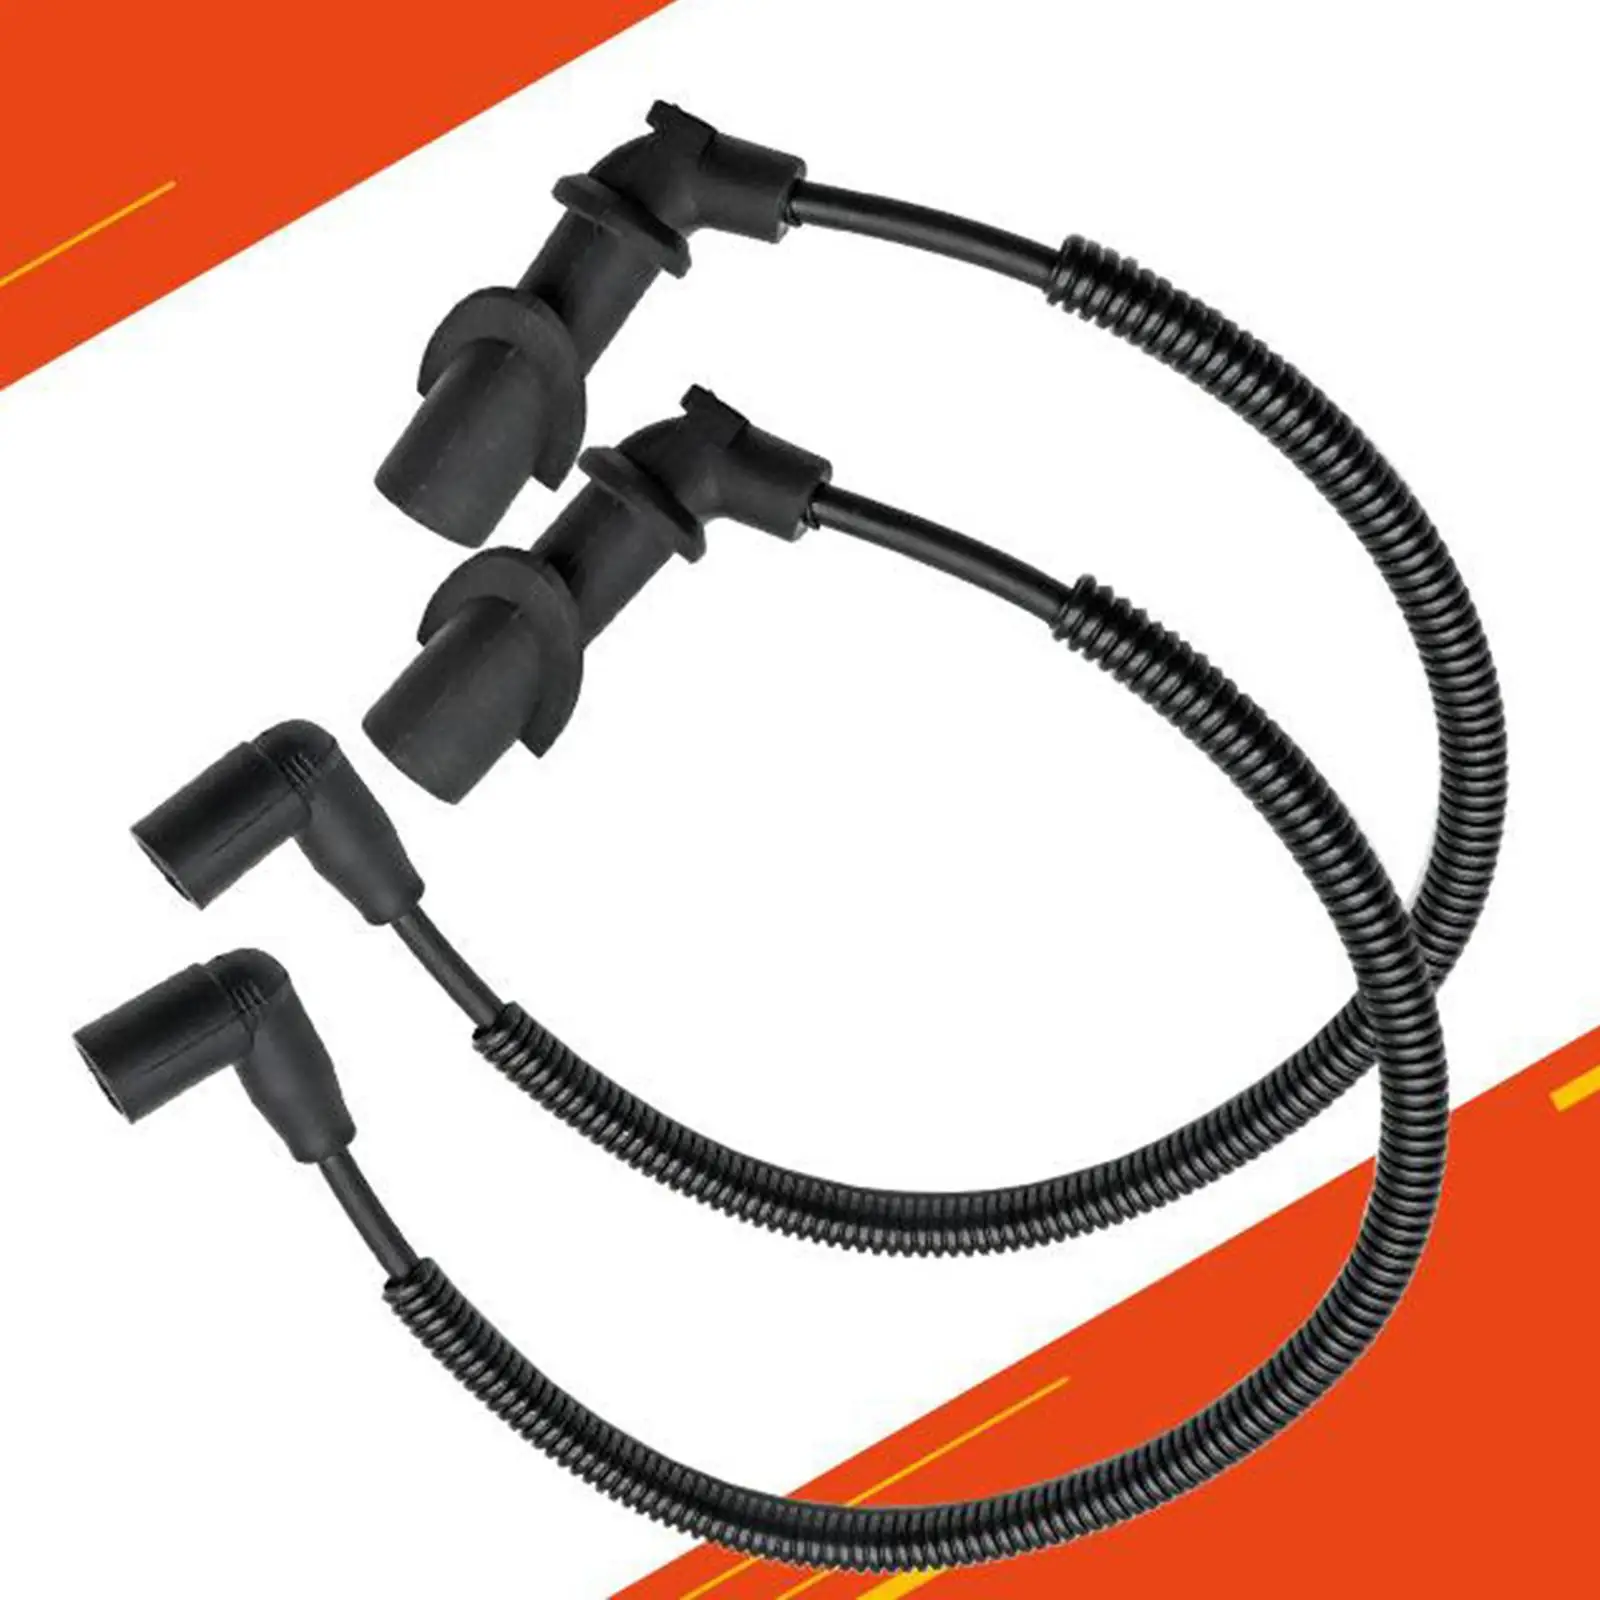 2Pcs Spark Plug Ignition Coil Wires for Crew 700 2009 High quality Simple Installation